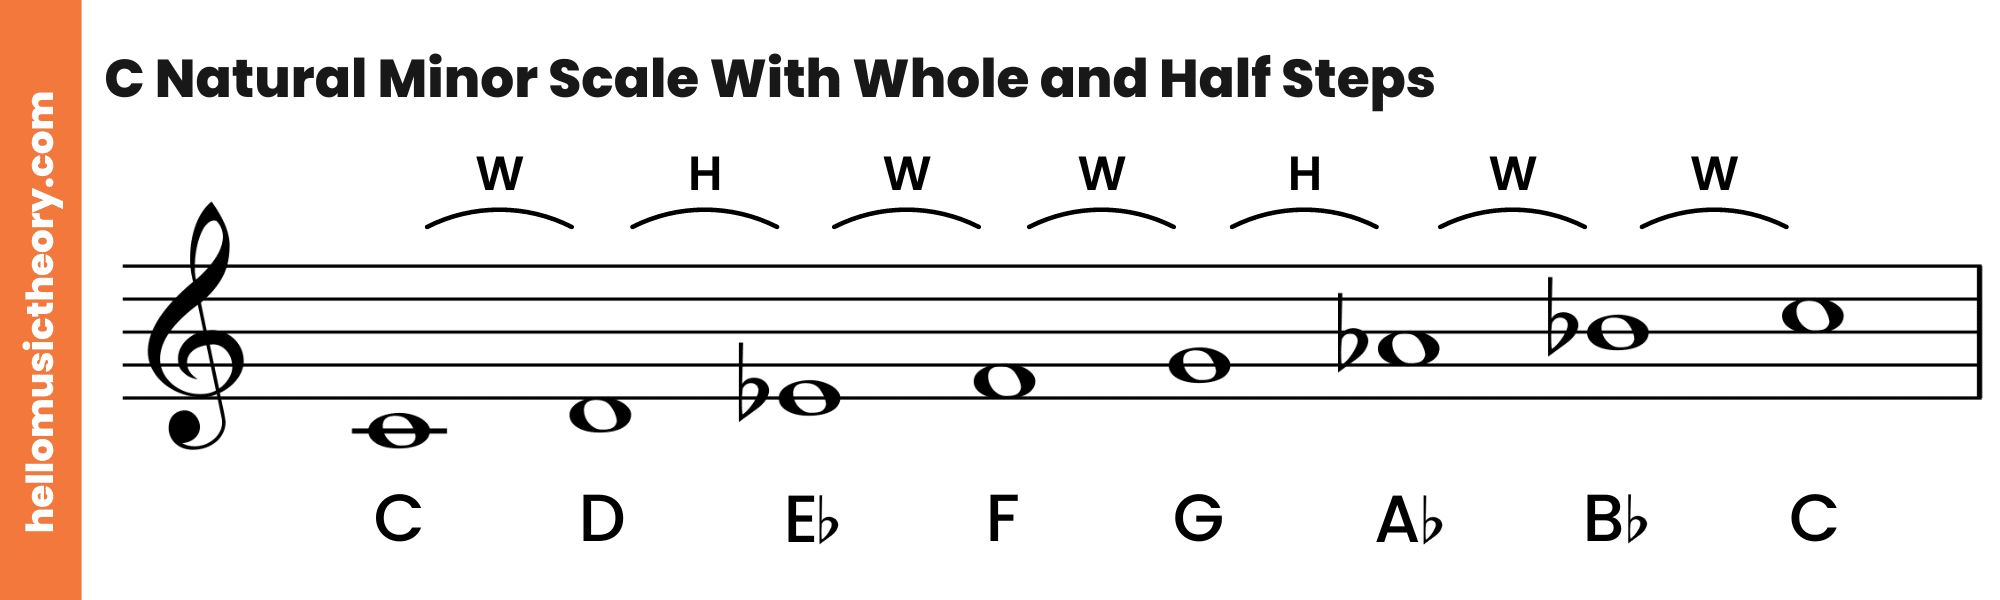 C Natural Minor Scale Treble Clef Ascending With Whole and Half Steps